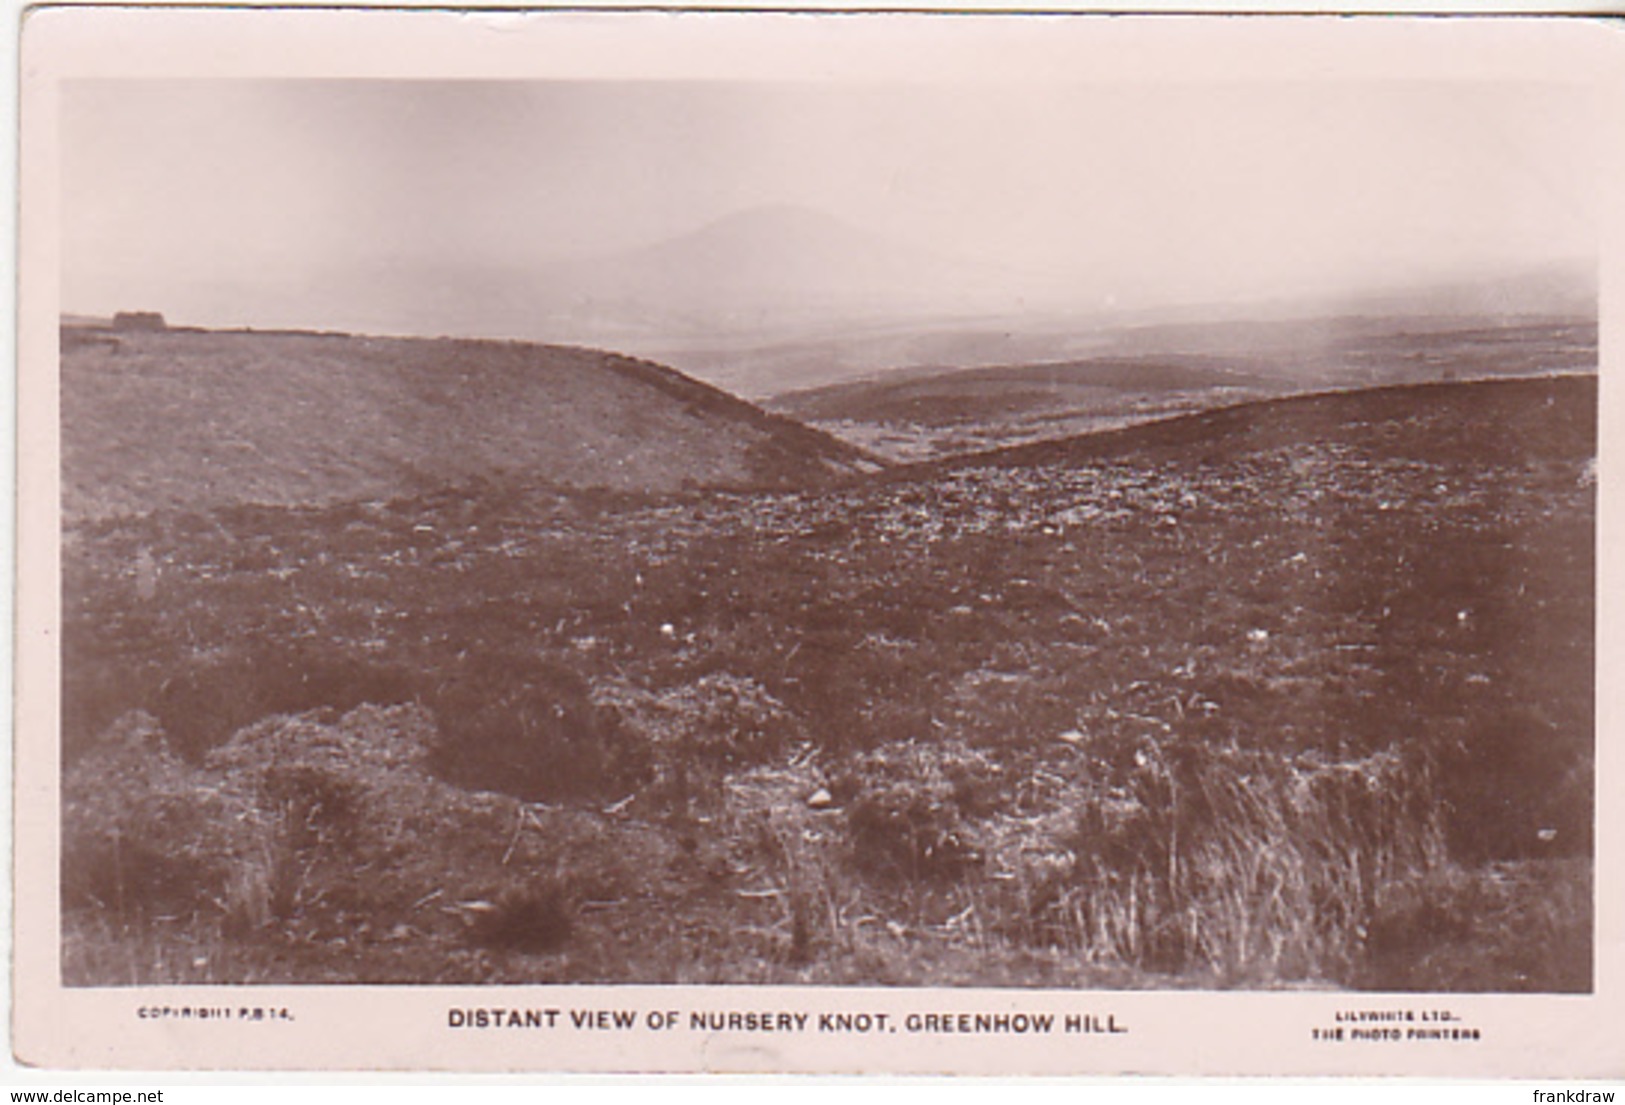 Postcard - Distant View Of Nursery Knot, Greenhow Hill - Card No. P.B 14 - Good - Unclassified